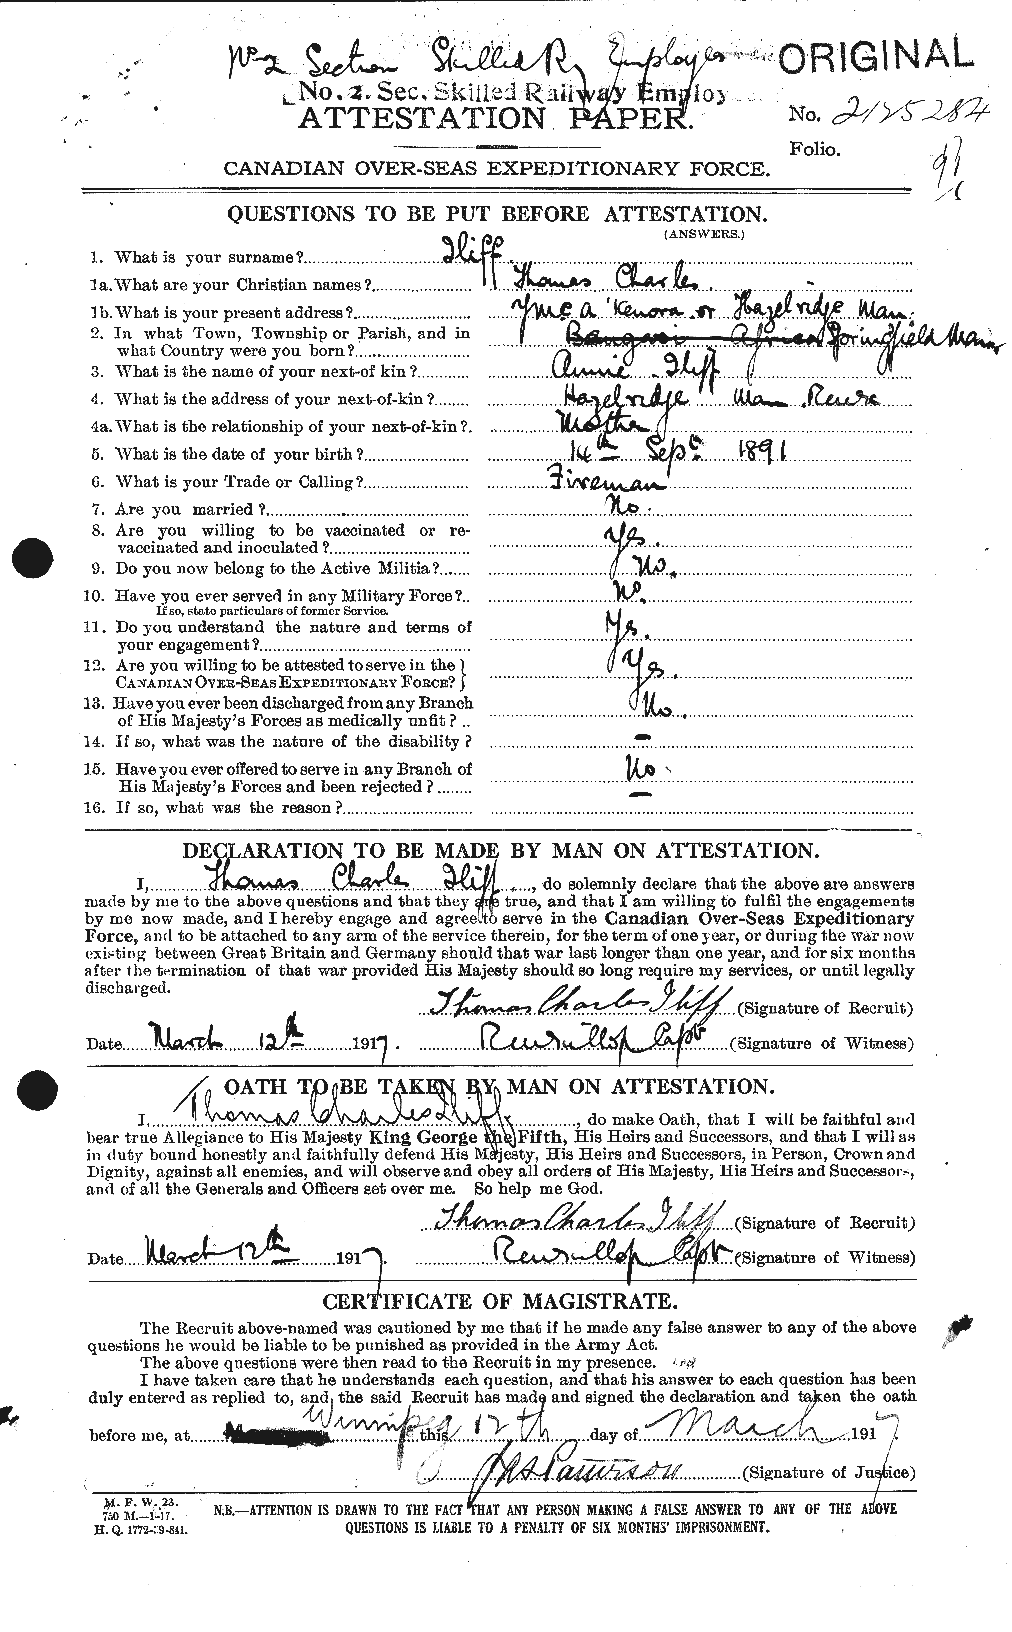 Personnel Records of the First World War - CEF 413256a